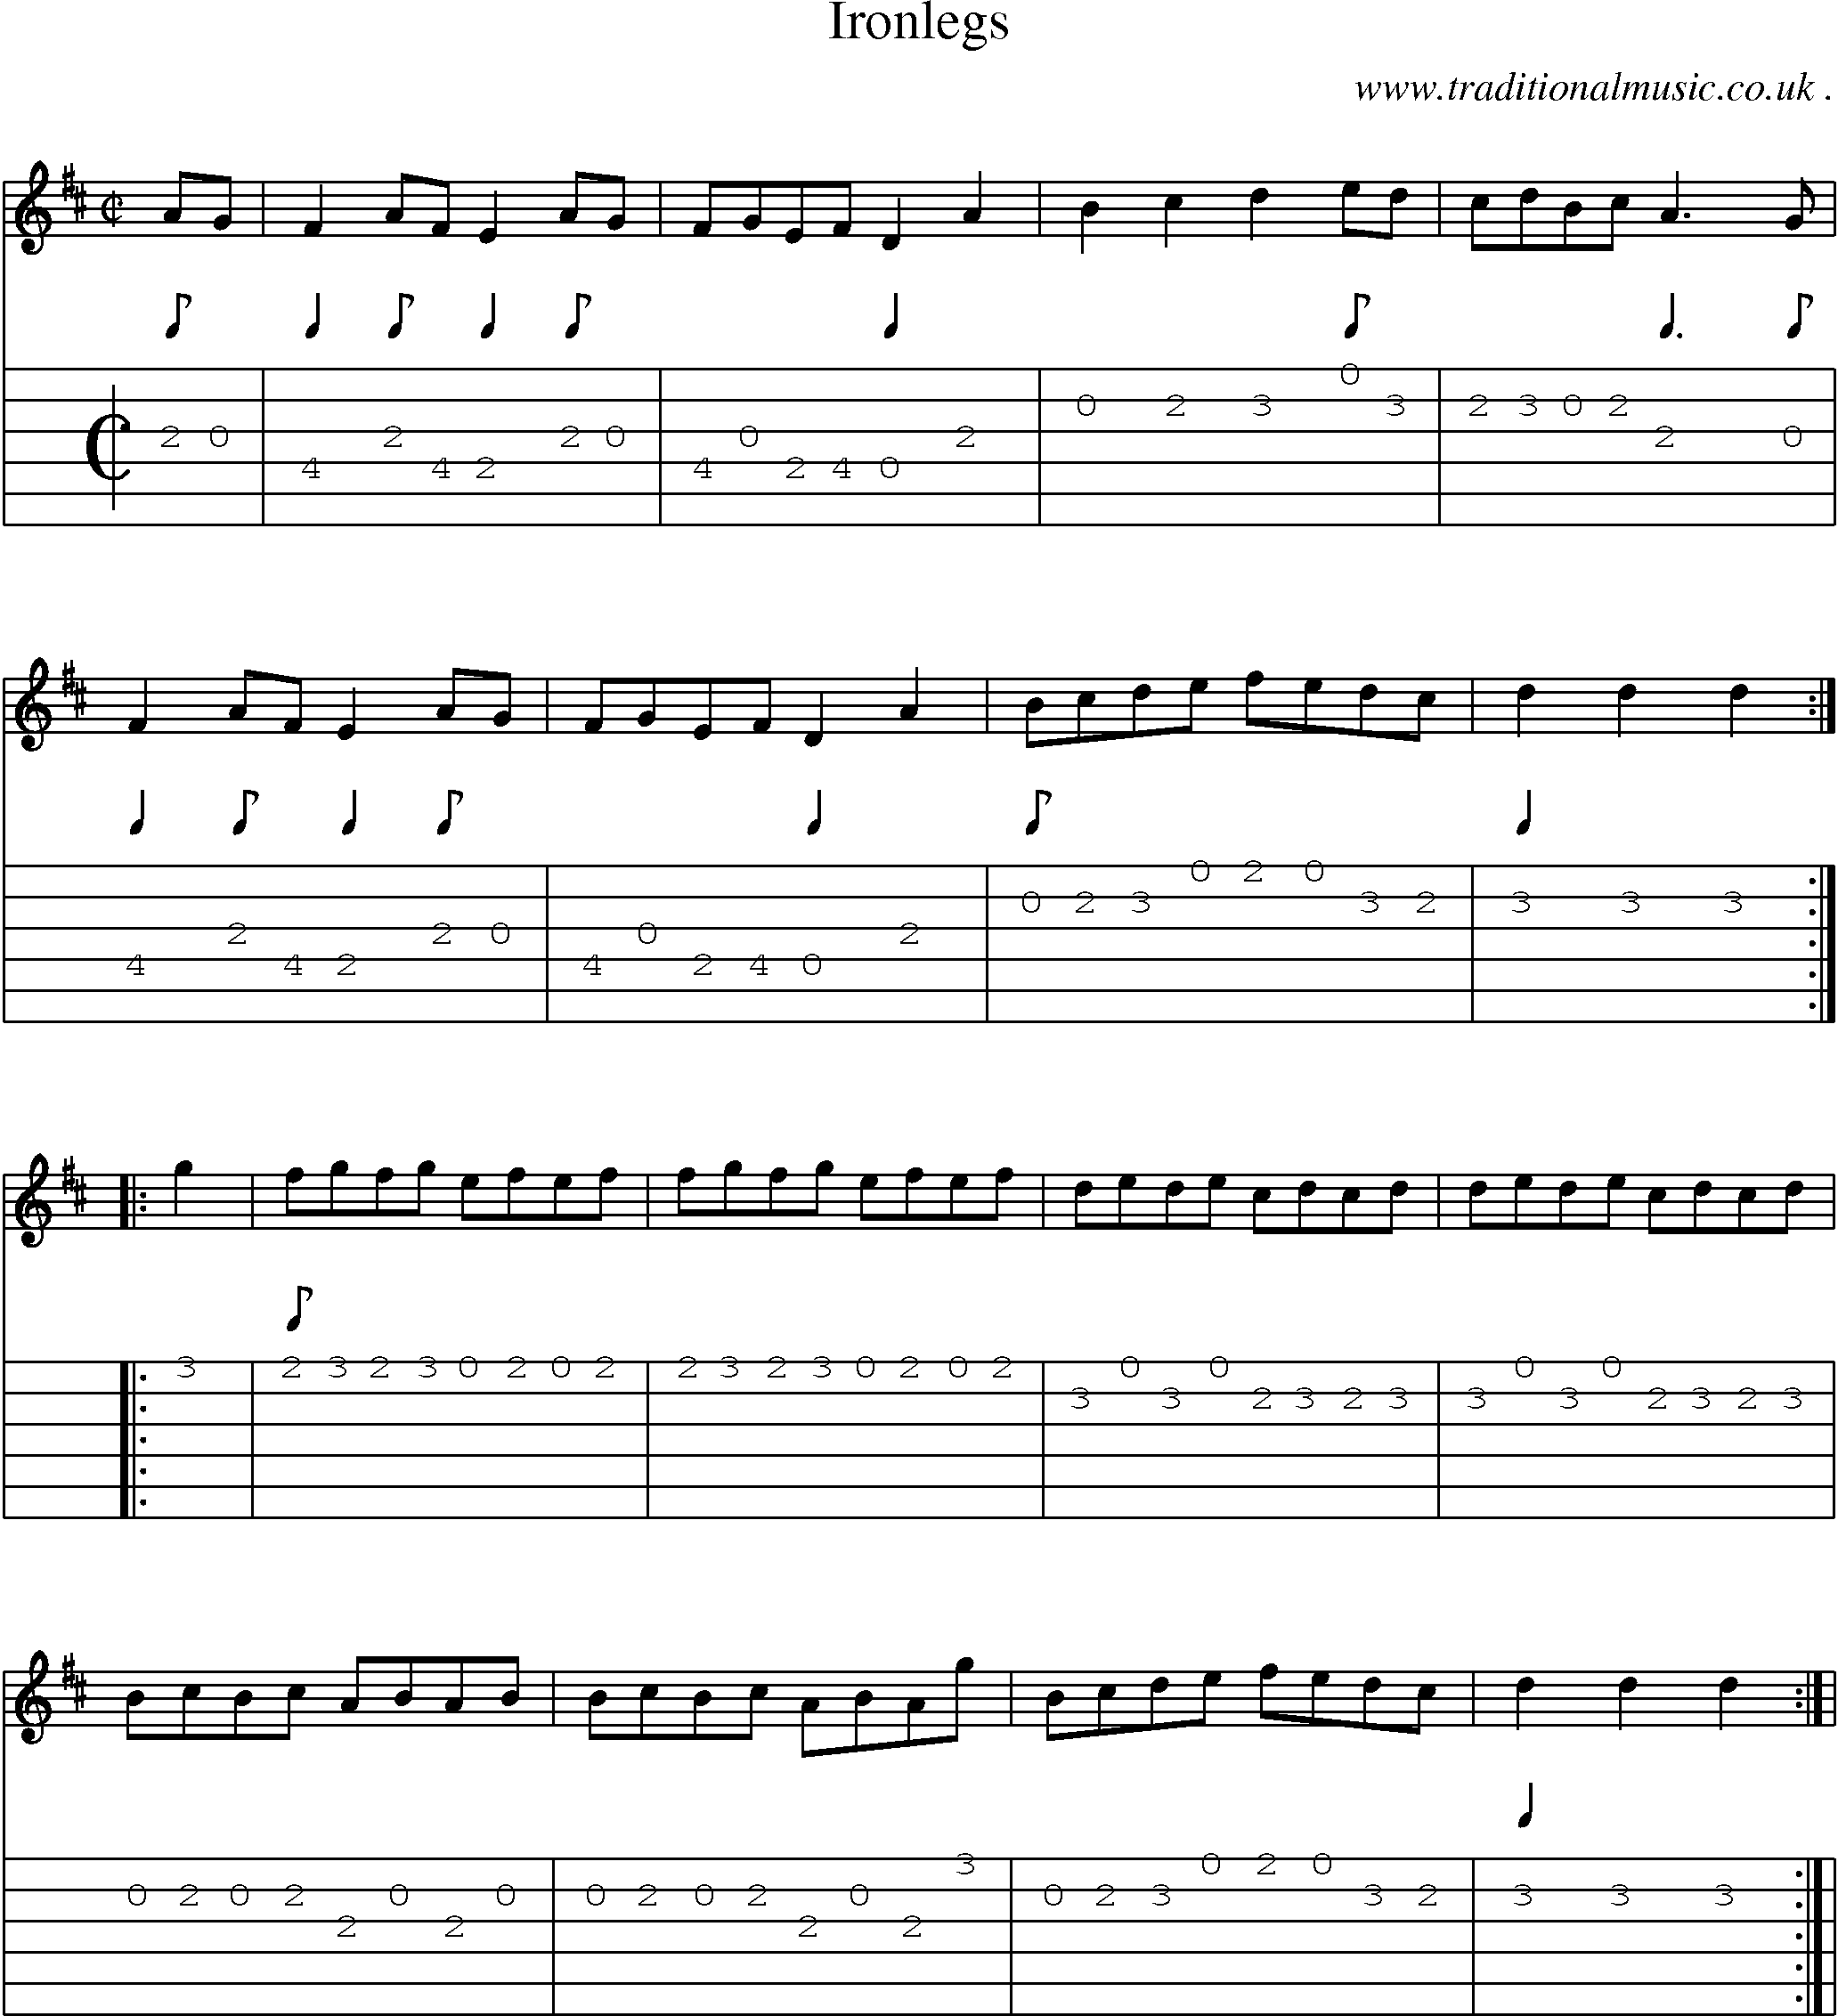 Sheet-Music and Guitar Tabs for Ironlegs